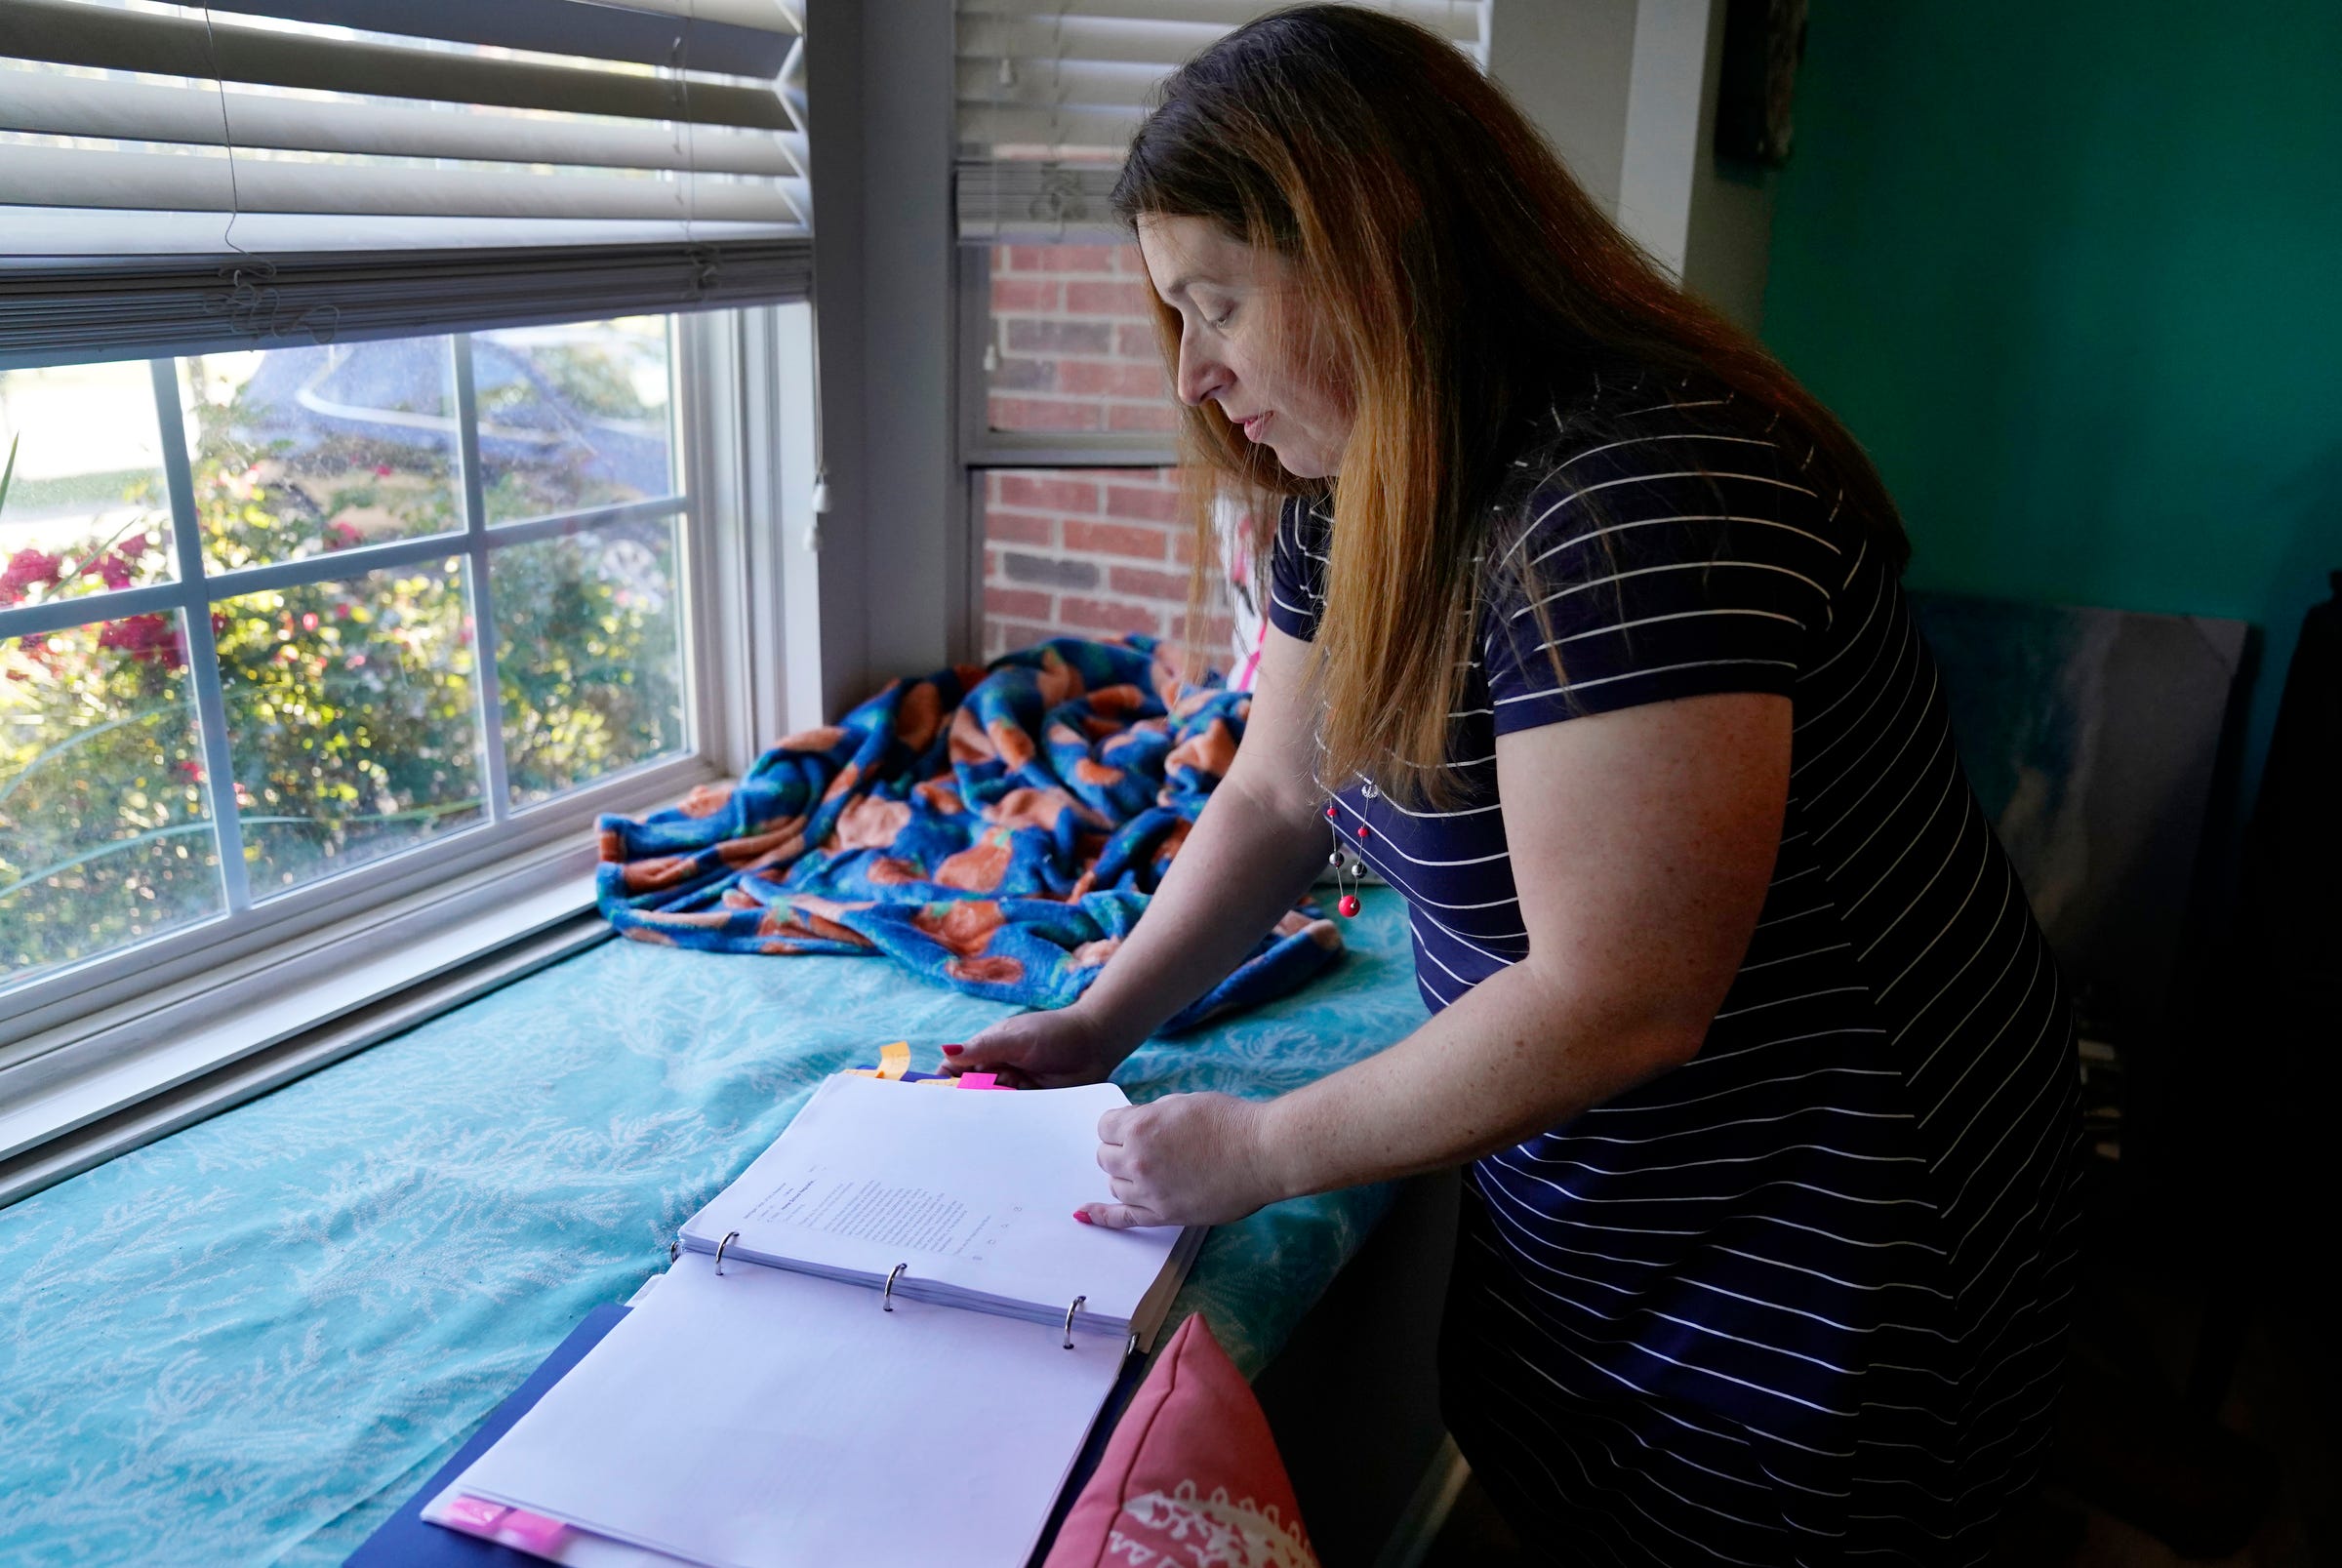 Kara Stamiris, 42, of Ypsilanti photographed Oct. 18 at her home. She keeps a binder tracking her efforts to find schooling for her nieces and nephew.